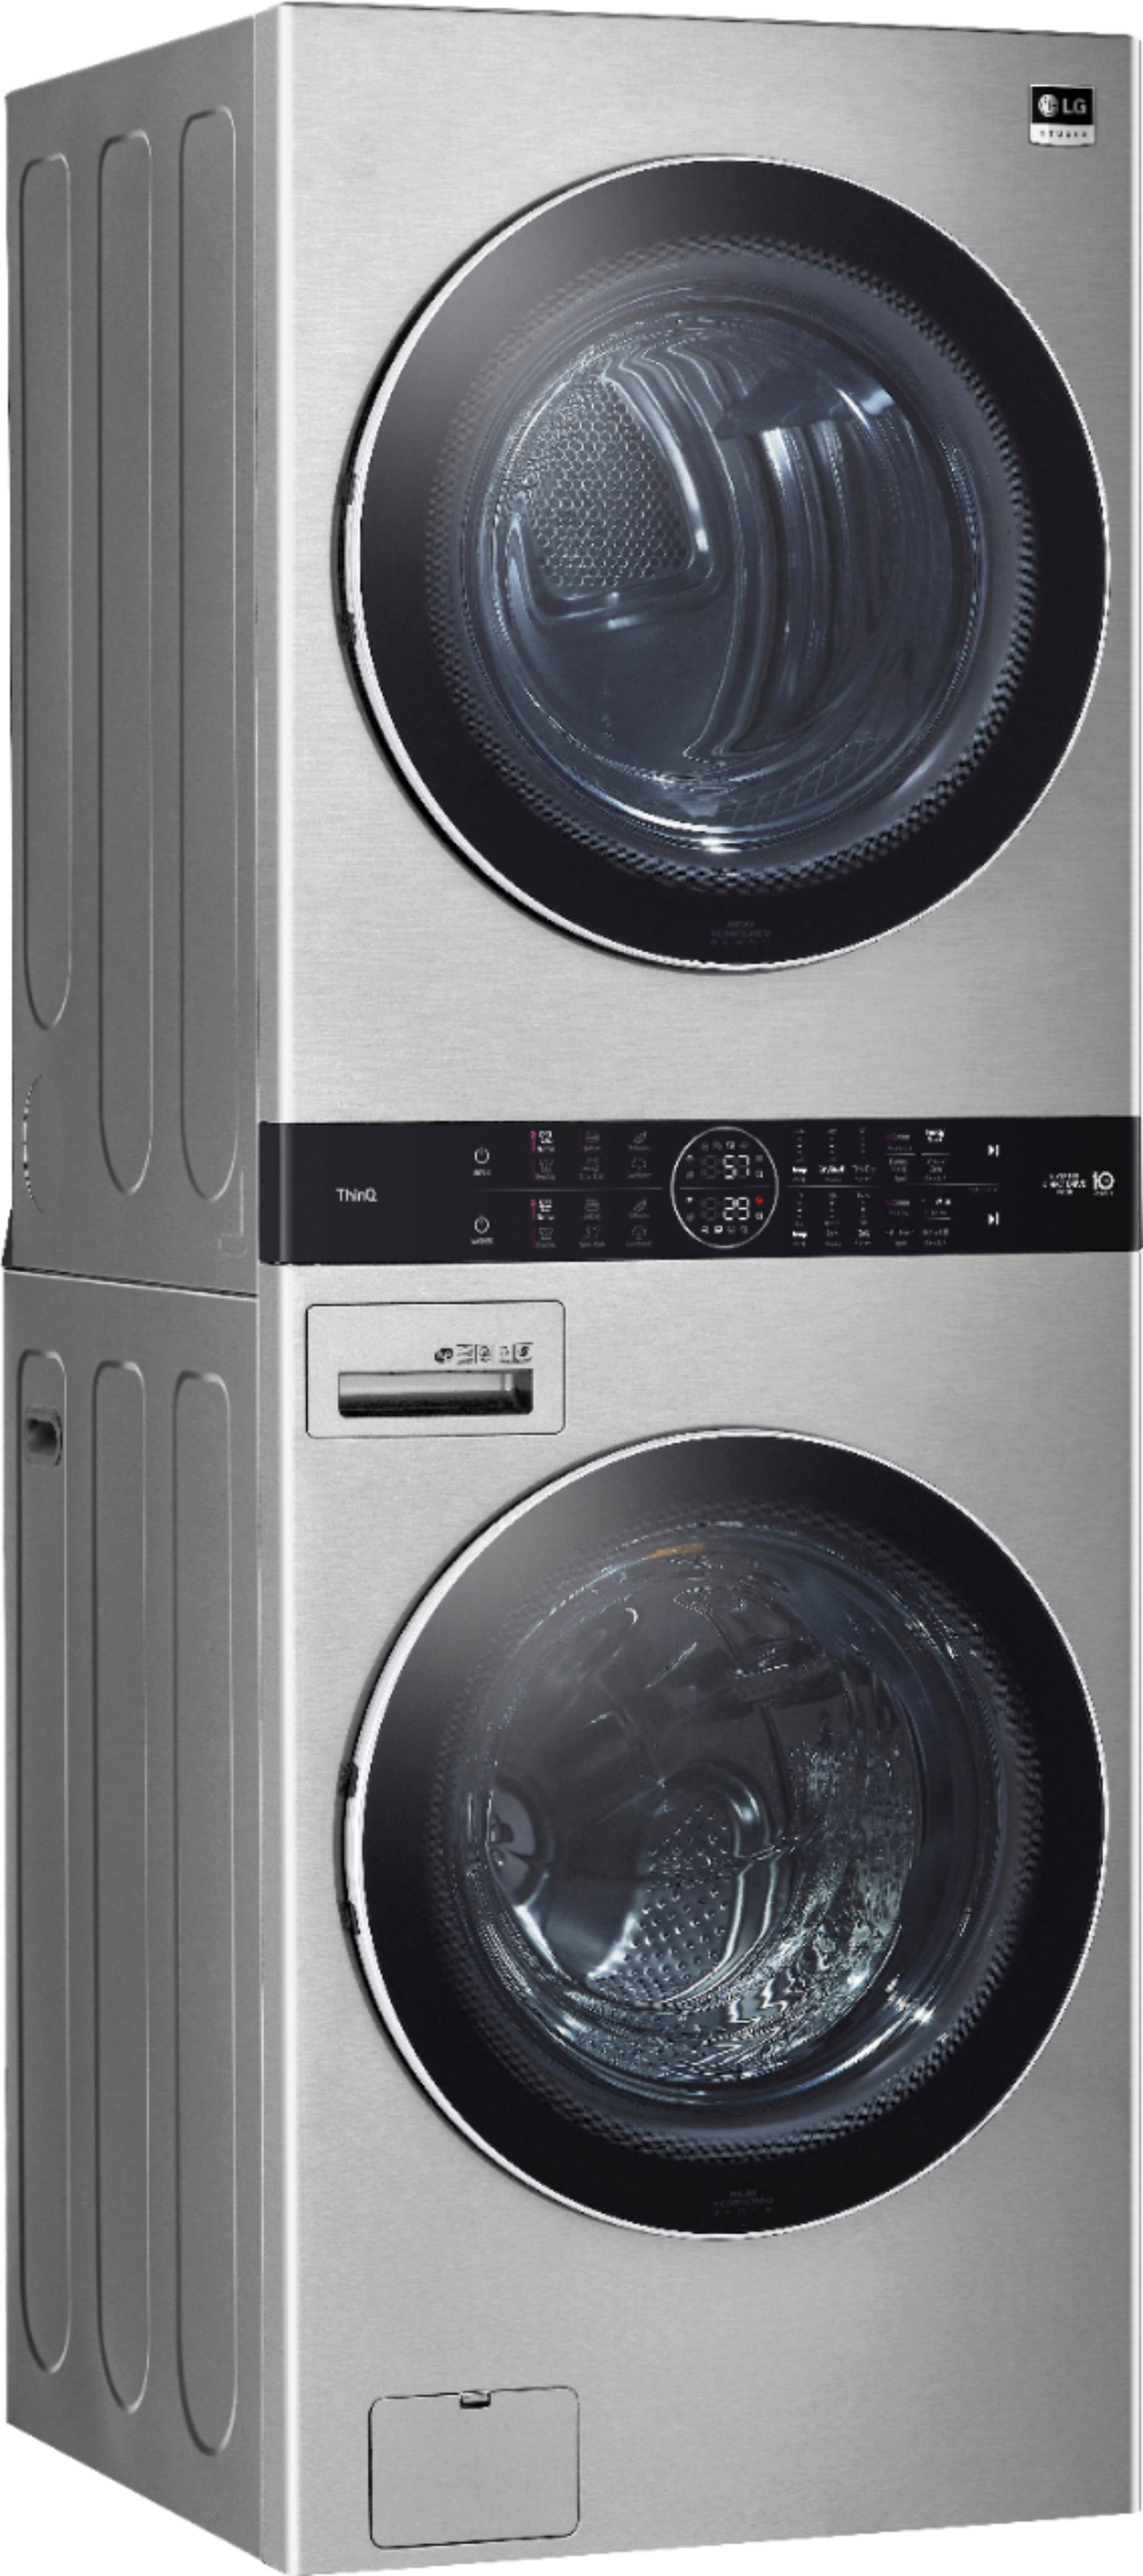 Angle View: LG - STUDIO 5.0 Cu. Ft. HE Smart Front Load Washer and 7.4 Cu. Ft. Gas Dryer WashTower with Steam and Built-In Intelligence - Noble steel